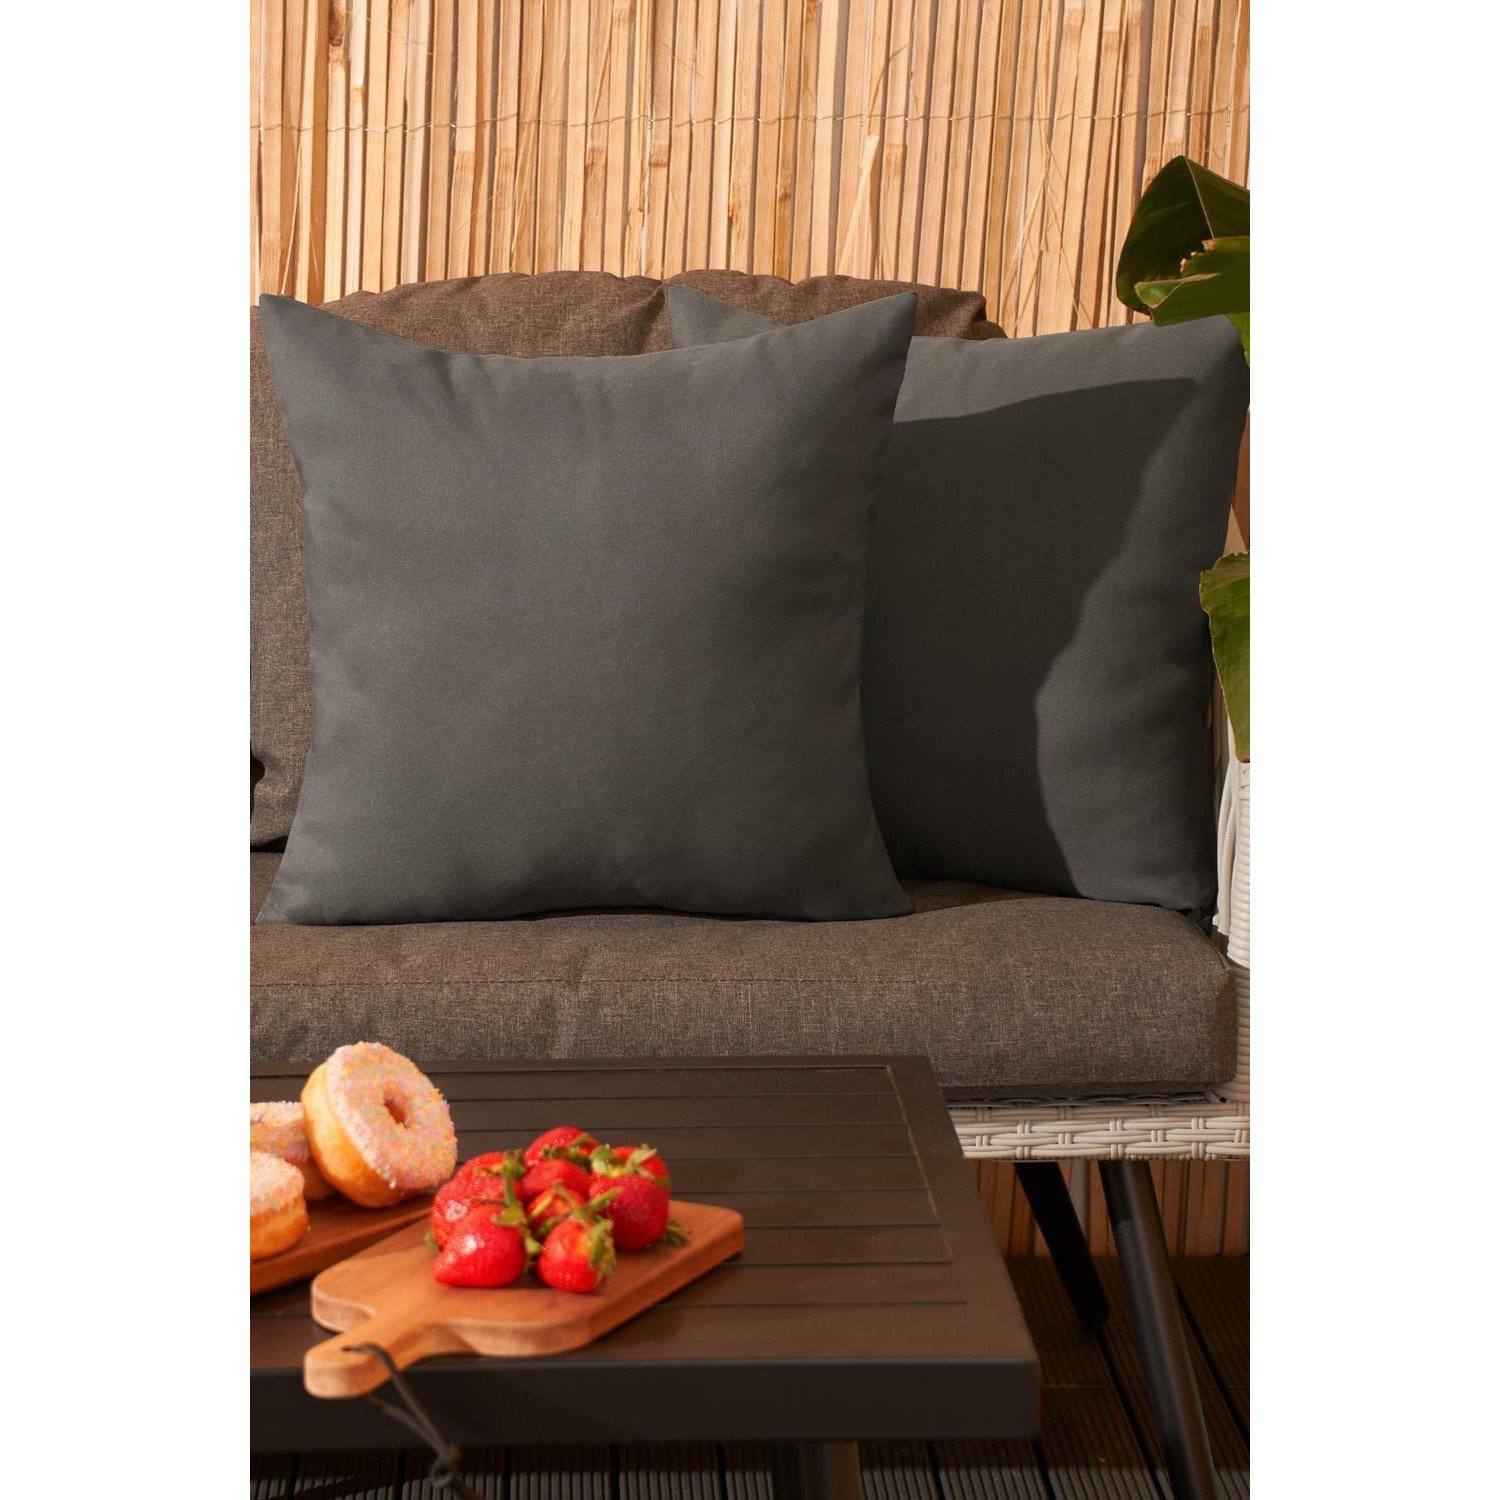 Set of 2 Cushion Cover Water Resistant Outdoor - image 1